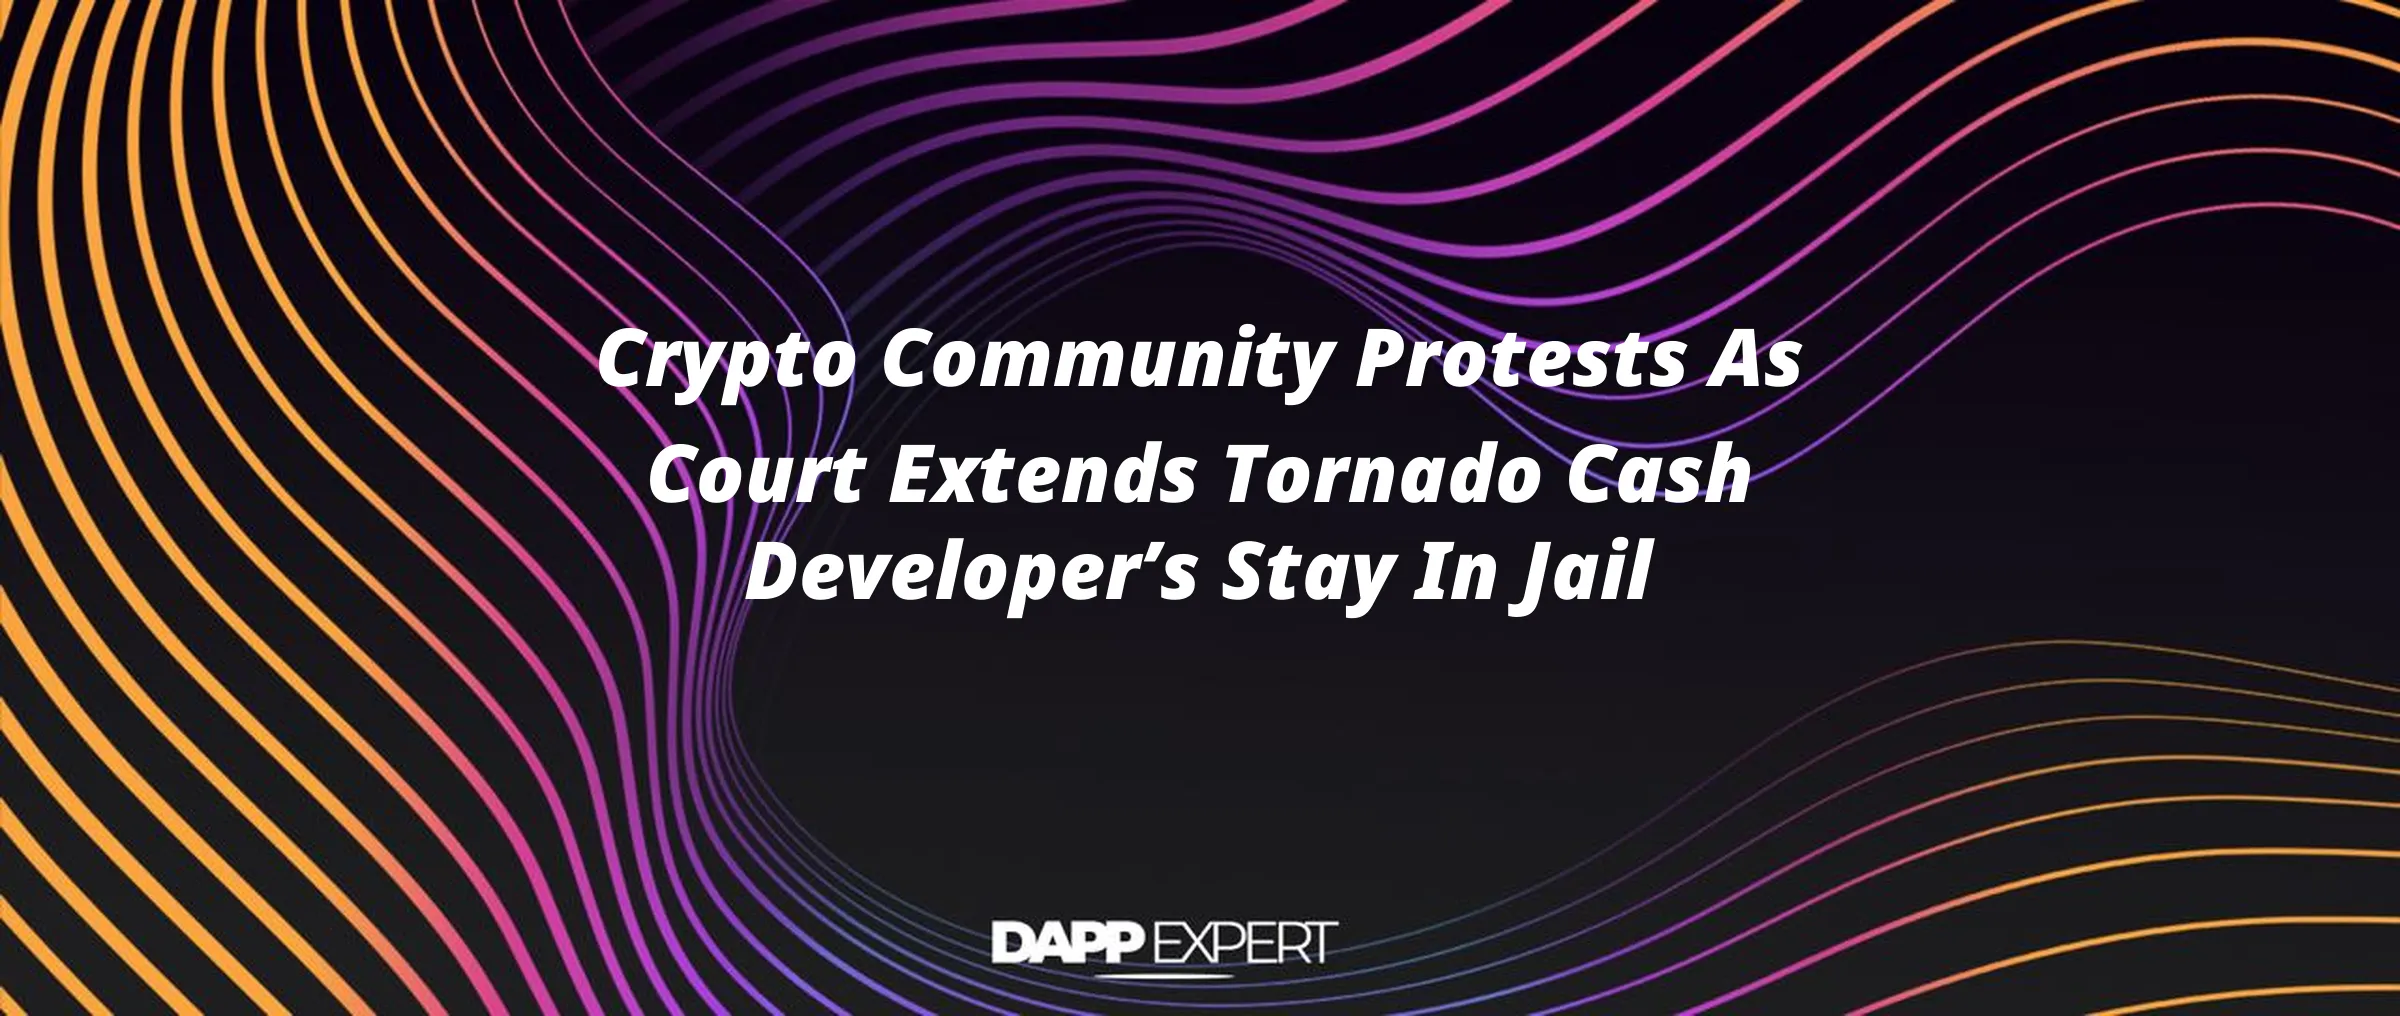 Crypto Community Protests As Court Extends Tornado Cash Developer’s Stay In Jail